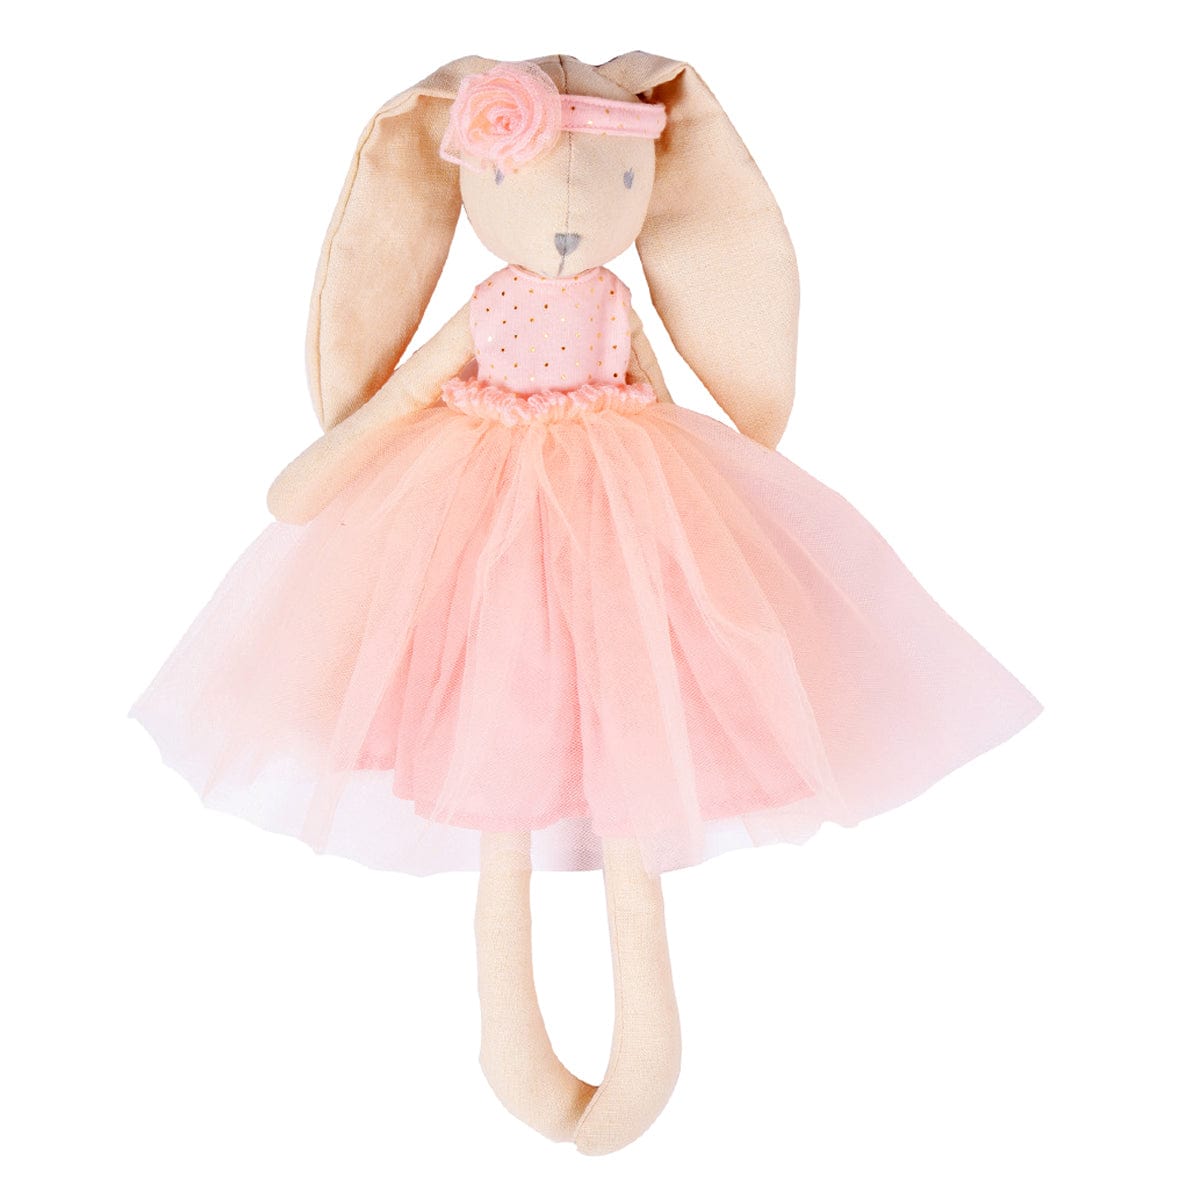 Marcella The Bunny In Ballerina Tulle Netting Pink Dress